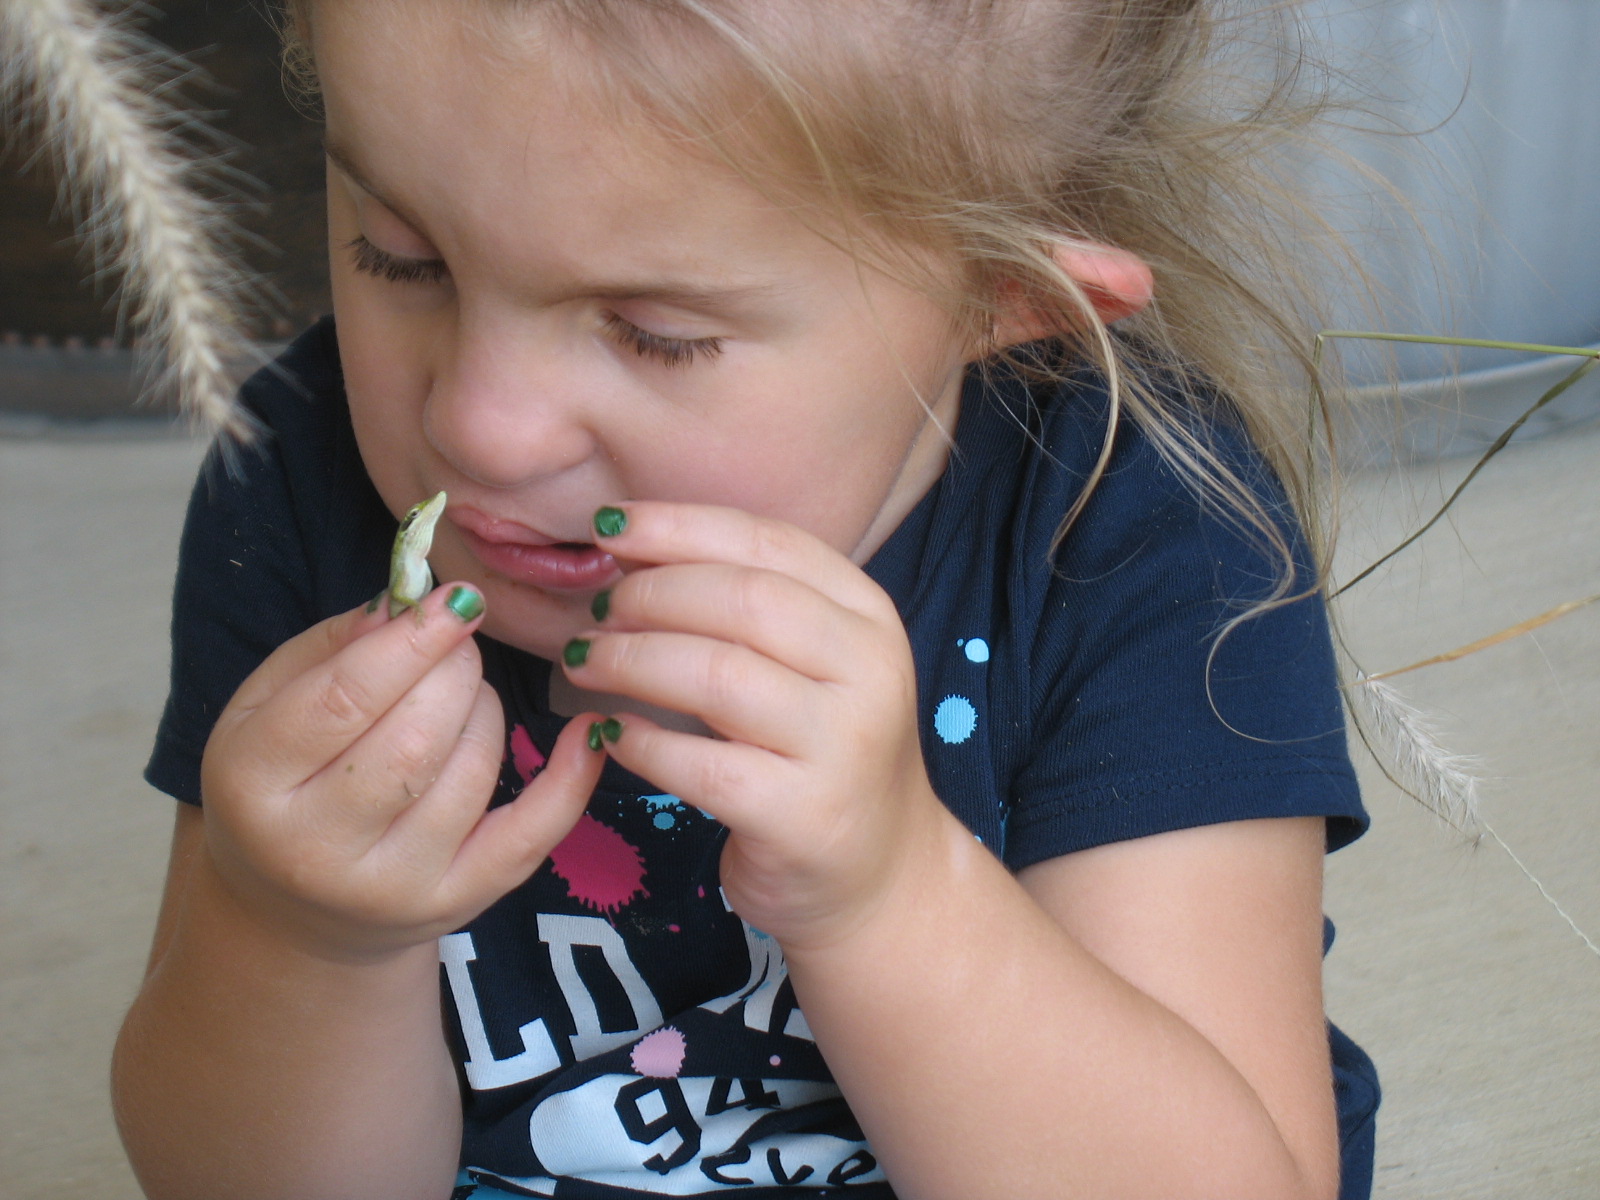 A young girl (approximately 5 years old) is holding a tiny lizard near her left eye to look at it carefully.